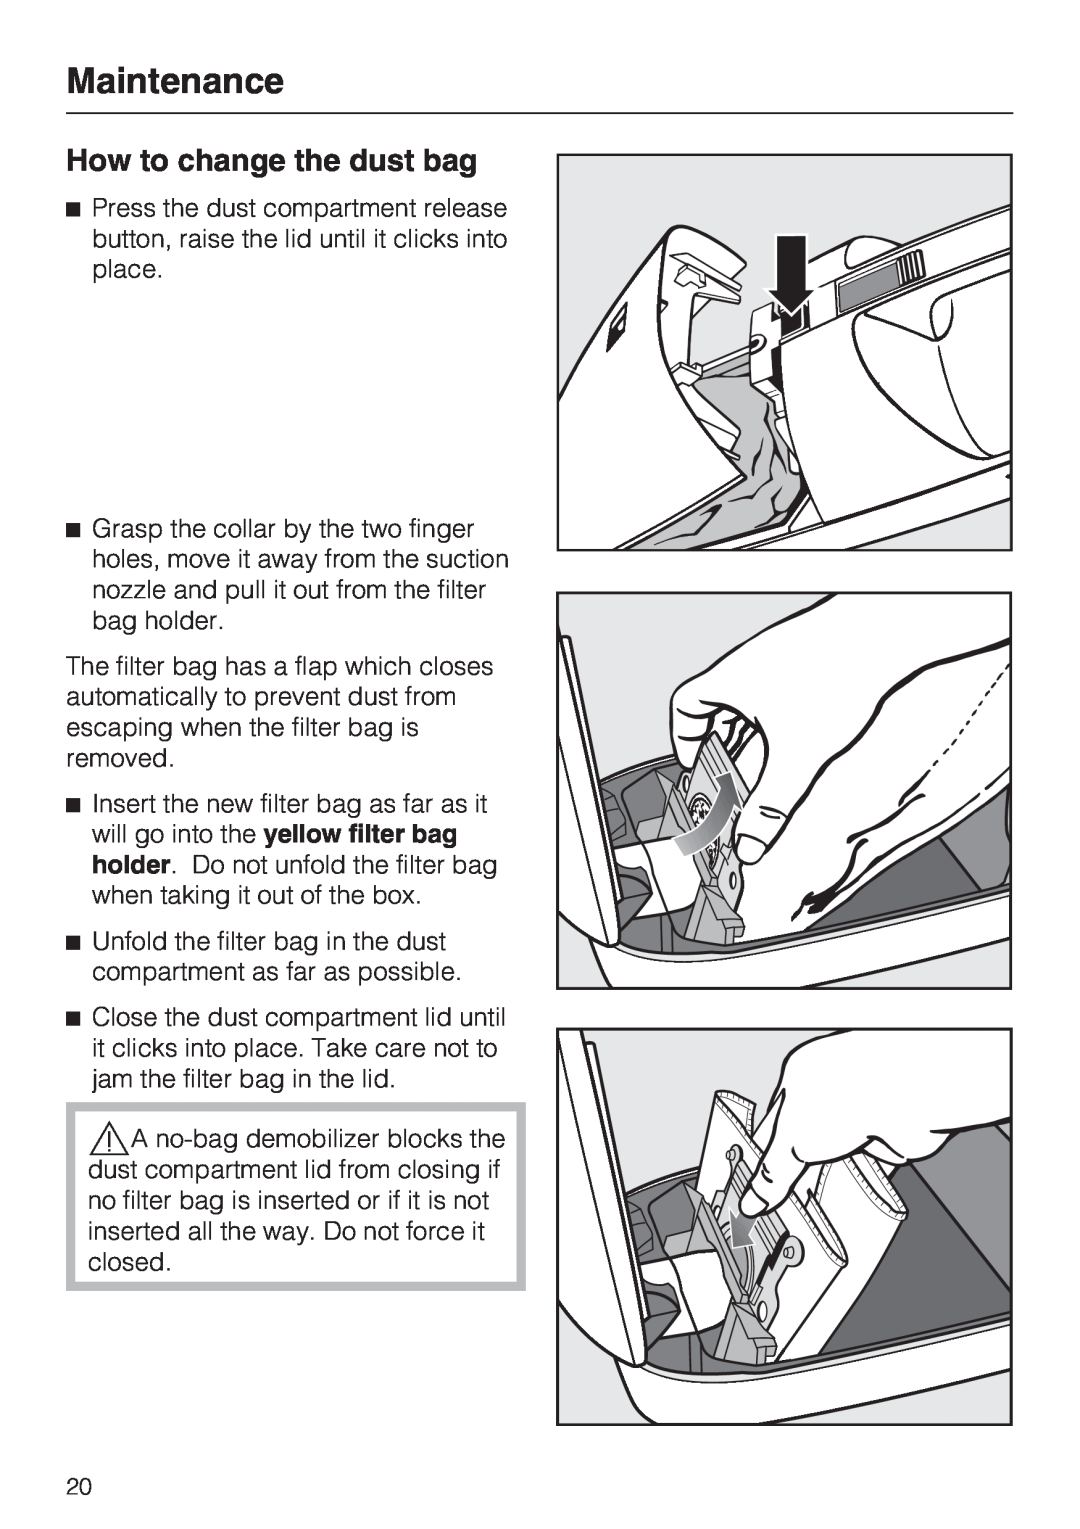 Miele S 190 operating instructions How to change the dust bag, Maintenance 